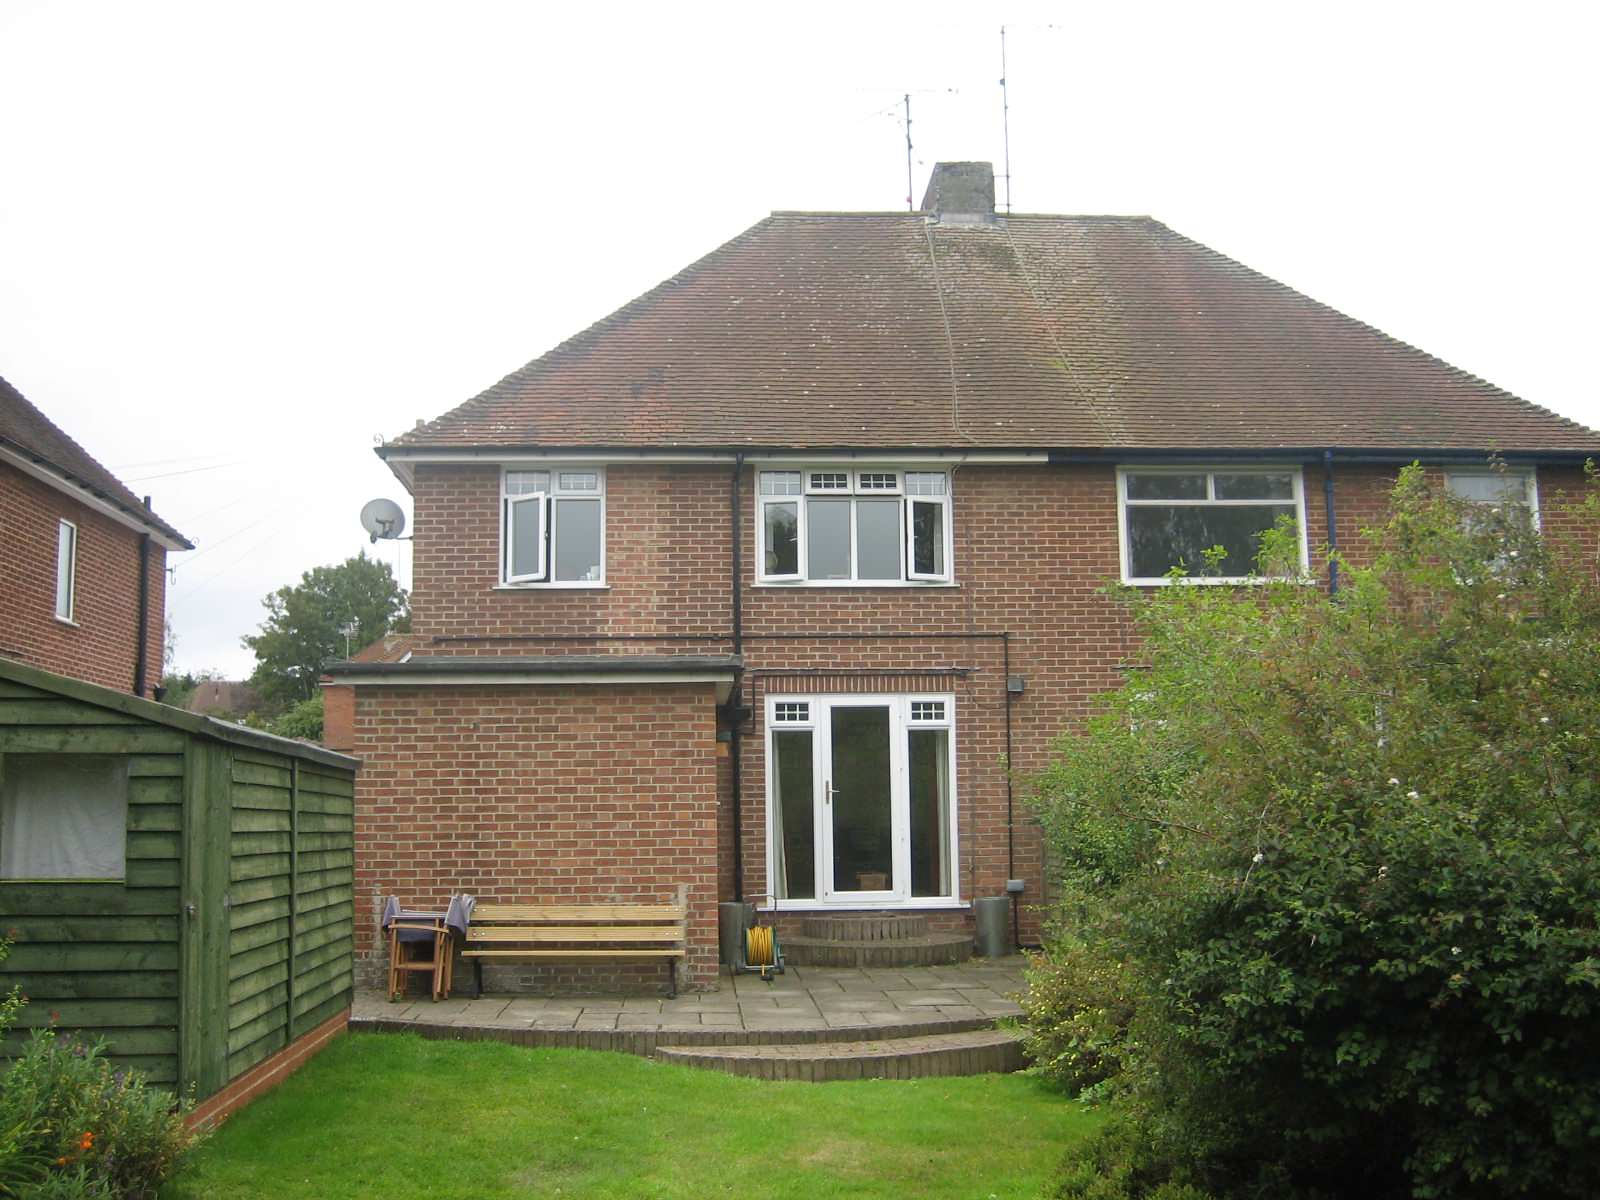 1930s Semi detached - Single storey kitchen, dining, family room extension